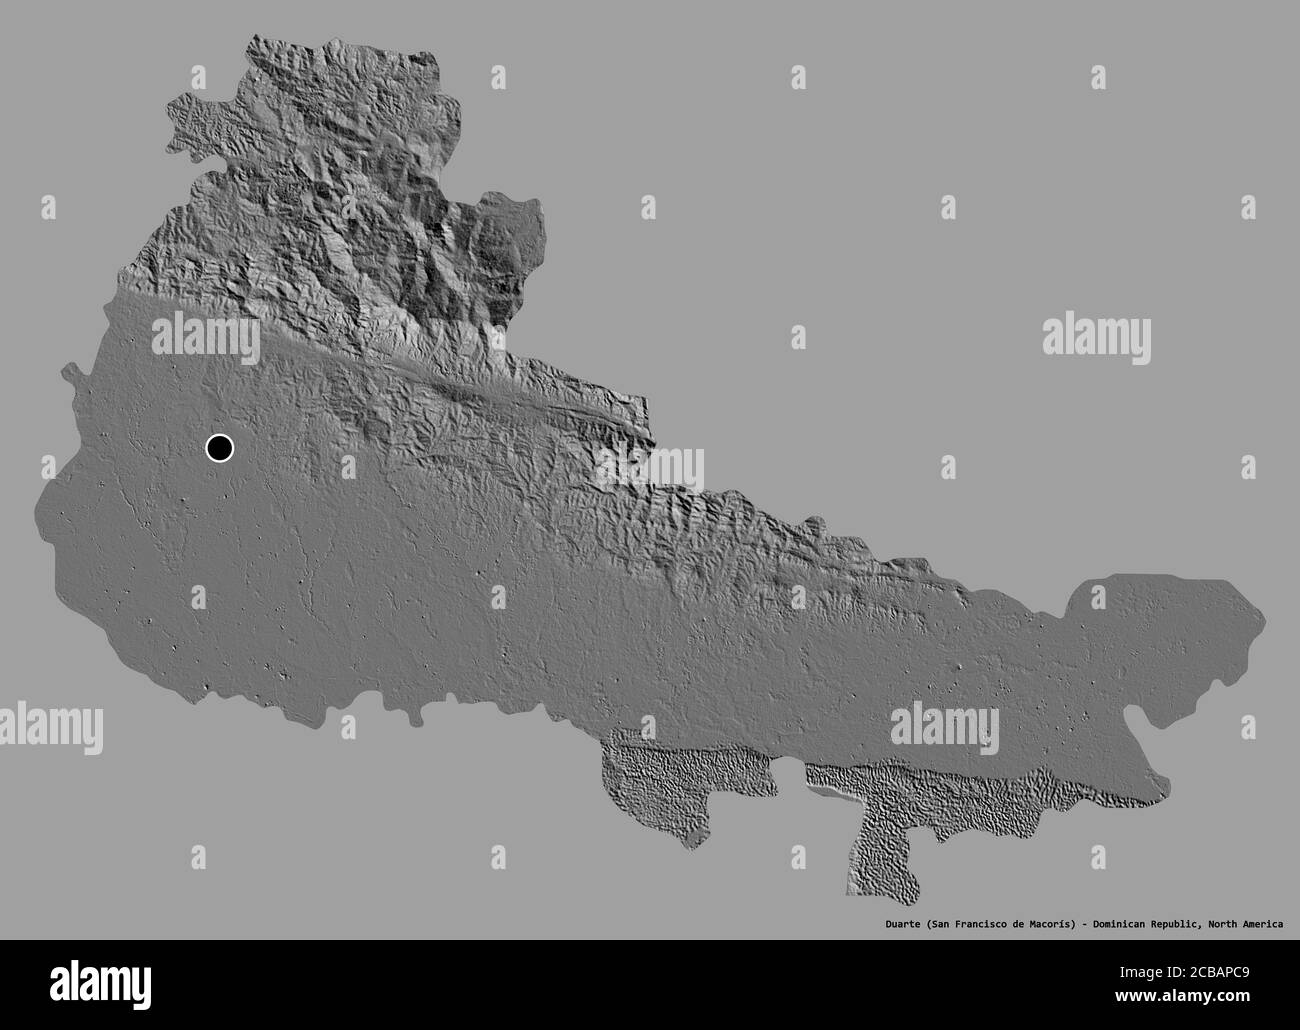 Shape of Duarte, province of Dominican Republic, with its capital isolated on a solid color background. Bilevel elevation map. 3D rendering Stock Photo